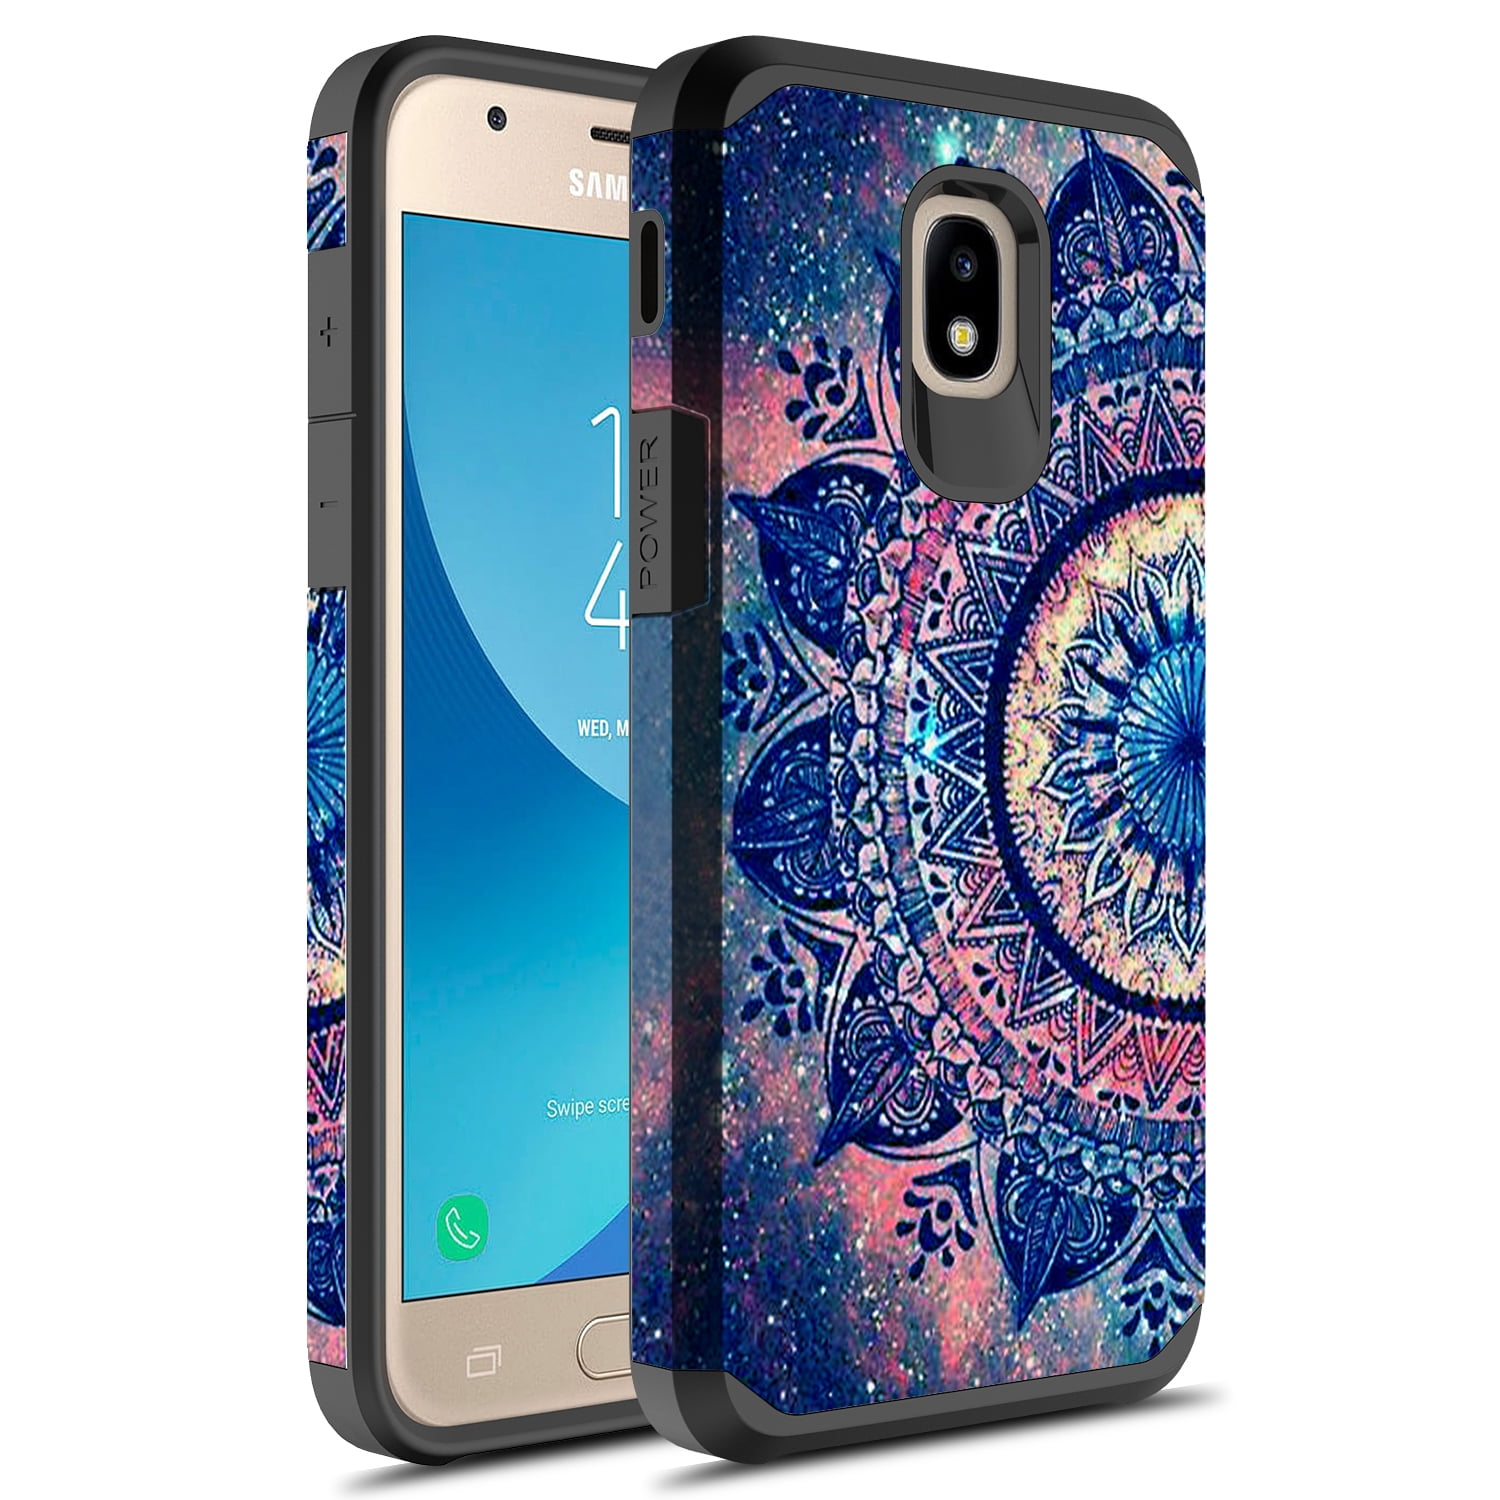 J7 Star/J7 Refine/J7 2018/J737/J7 TOP/J7 V 2nd Gen/J7 Aura/J7 Aero with Tempered Glass Screen Protector Ultra Slim Thin Glossy Stylish Cover Case Nova NageBee Case for Samsung Galaxy J7 Crown 